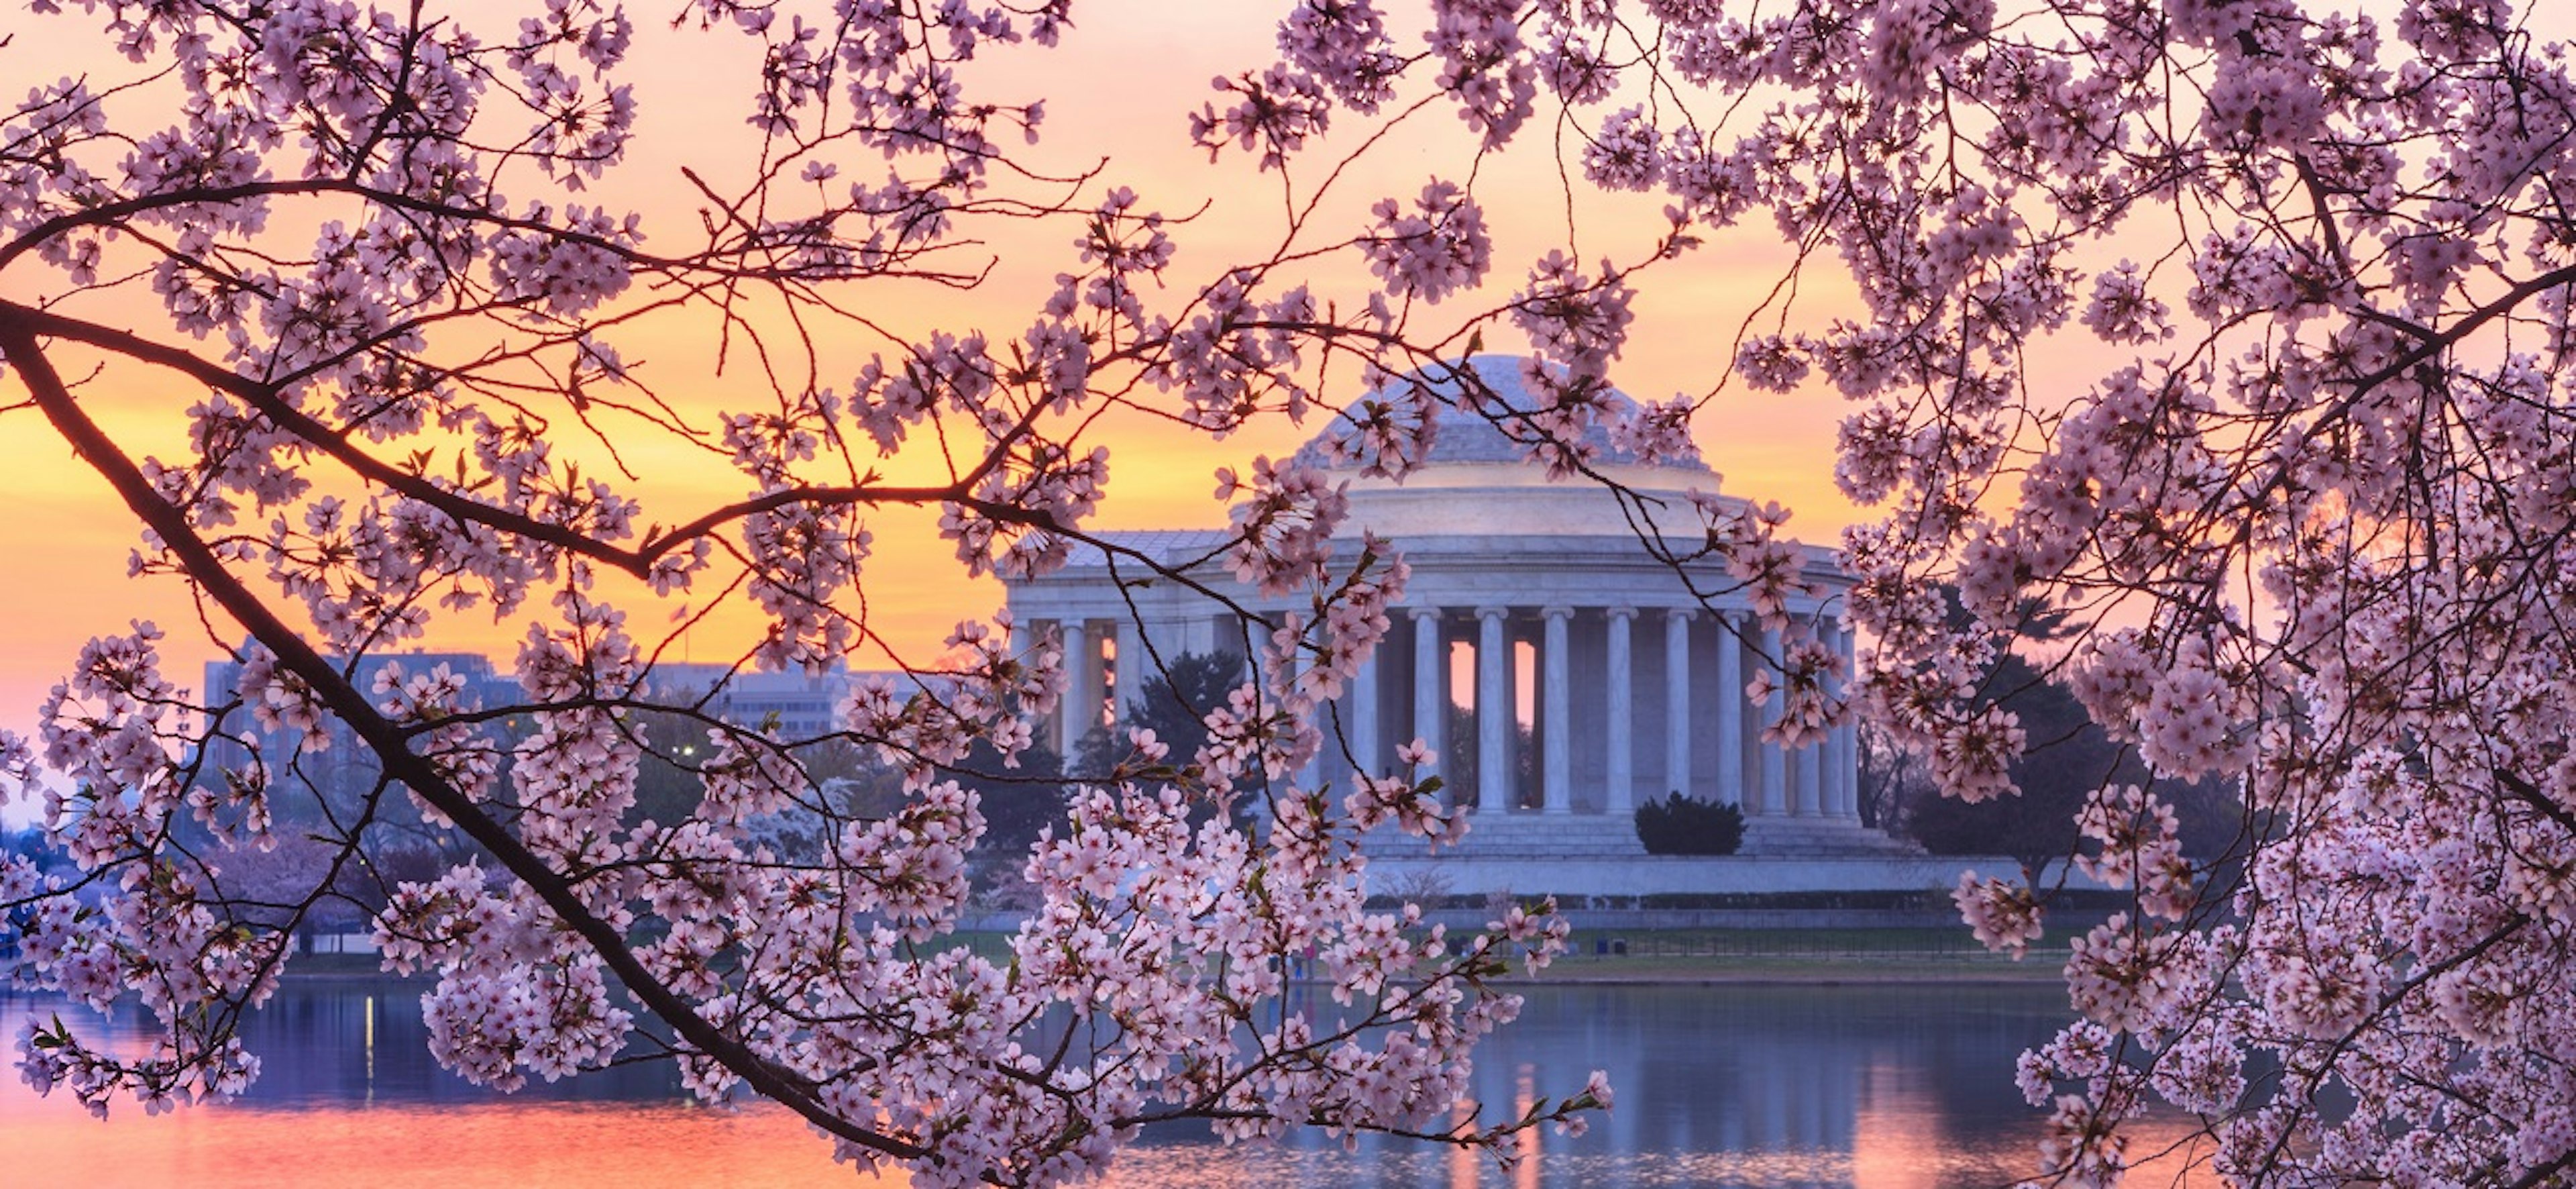 The Thomas Jefferson memorial in Washington DC at dusk, seen through the pink cherry blossoms